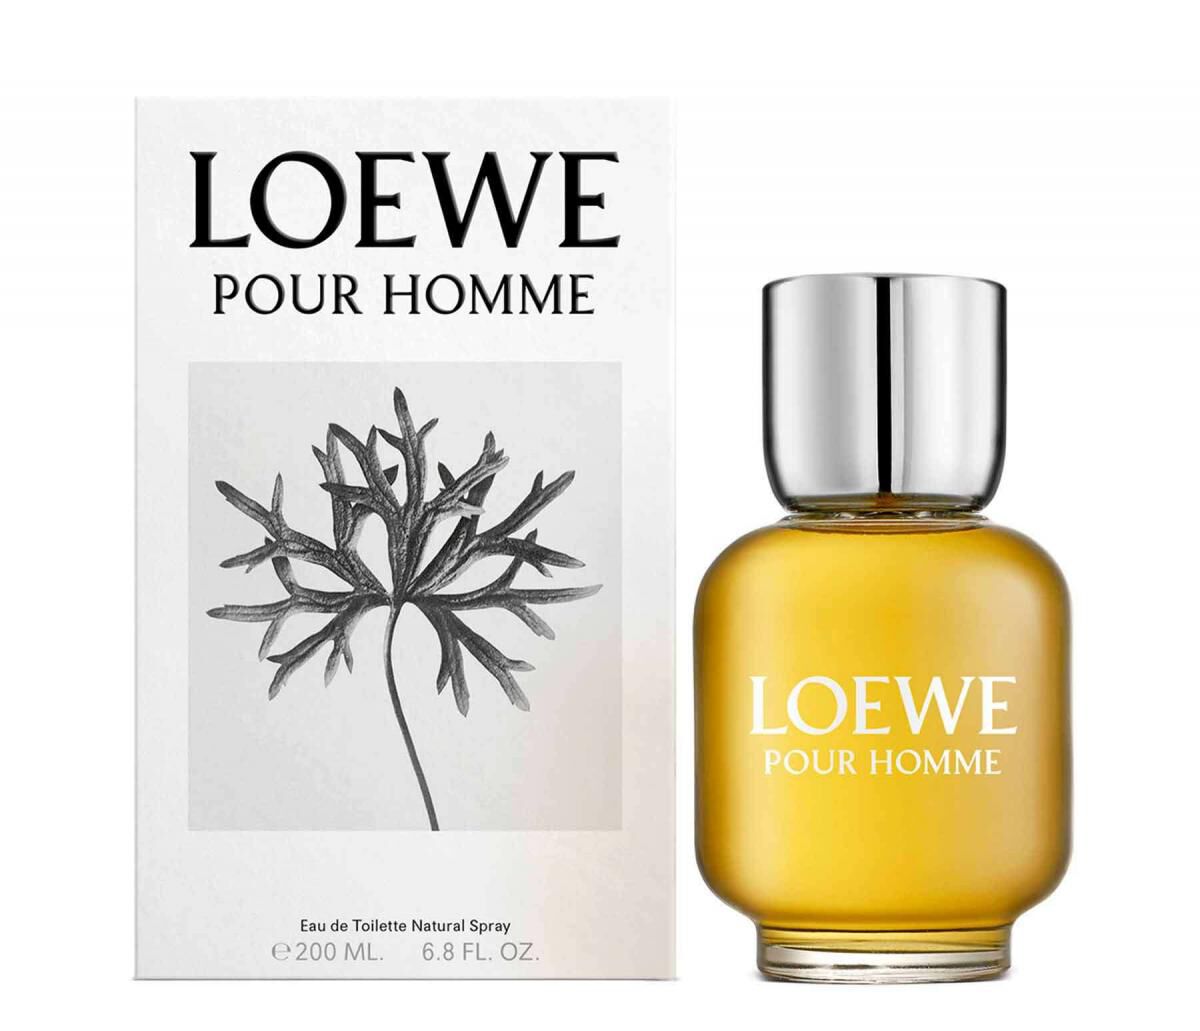 loewe pour homme after shave